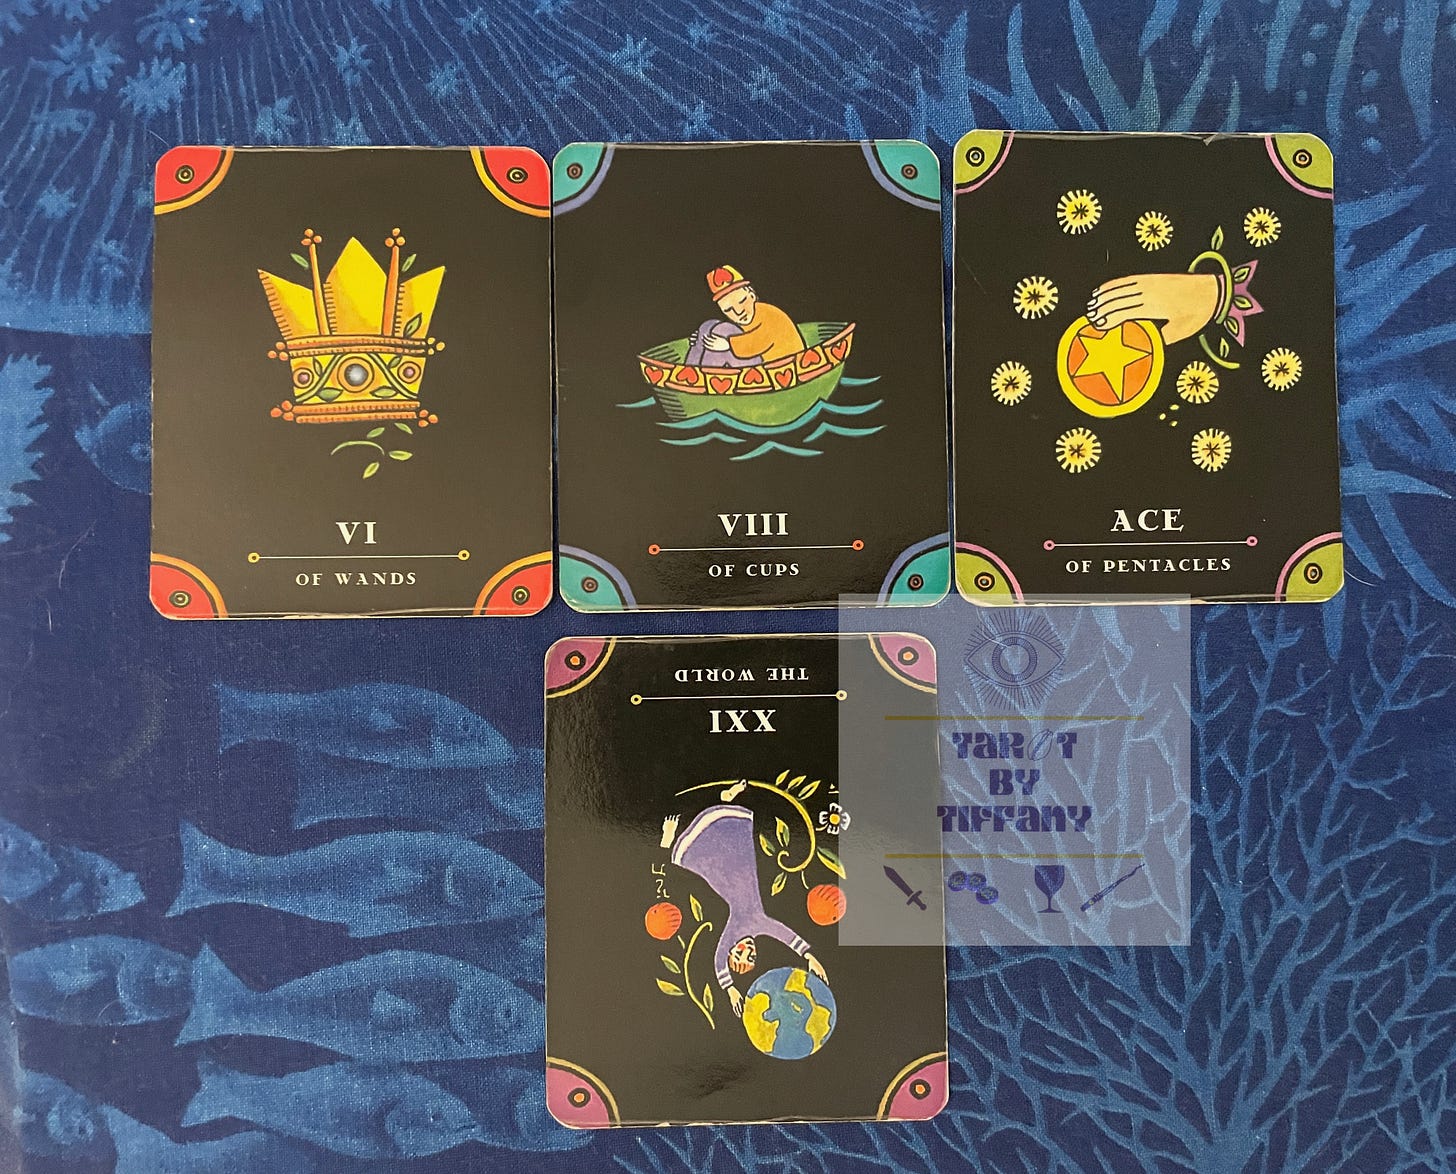 4-card reading using the Tarot Nova. The cards are laid against a blue cloth background with an aquatic motif in light blue. Top three cards (left to right): 6 of Wands, 8 of Cups, Ace of Pentacles. Bottom card: XXI-The World reversed.